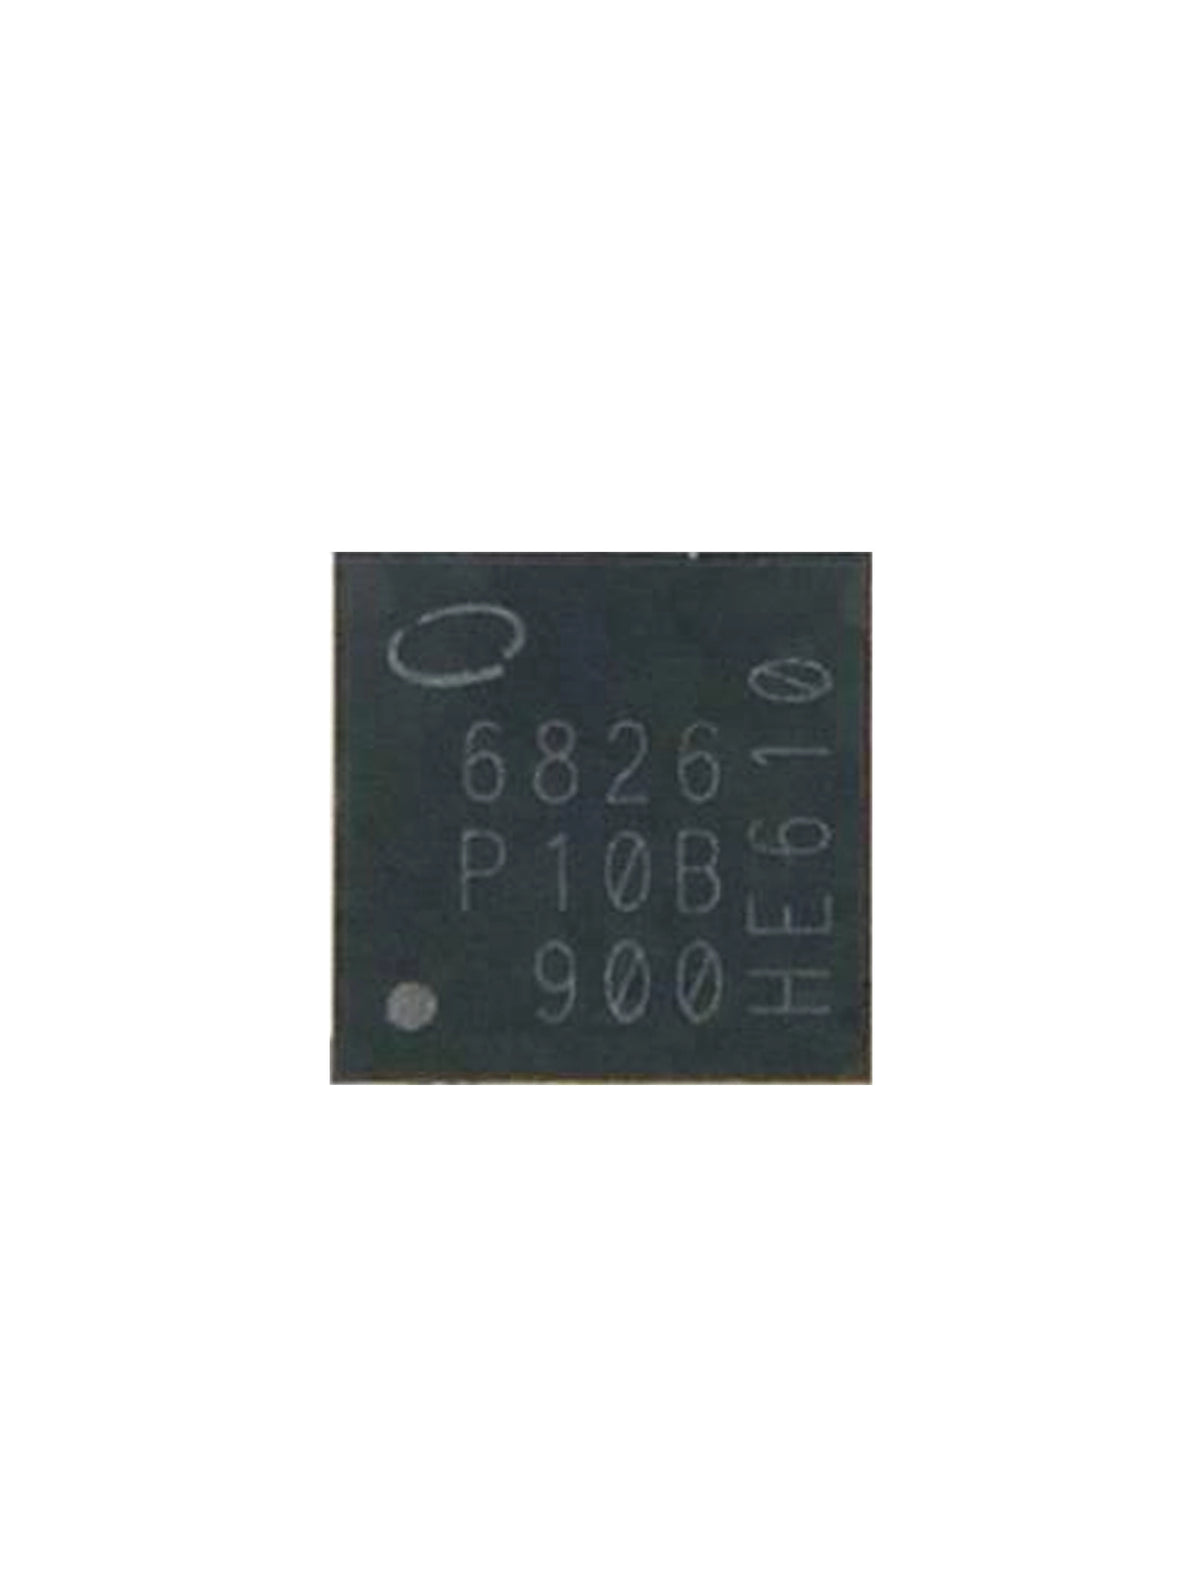 POWER MANAGEMENT IC (SMALL) COMPATIBLE WITH IPHONE 7 / 7 PLUS (BBPMU_RF: PMB6826 / INTEL)